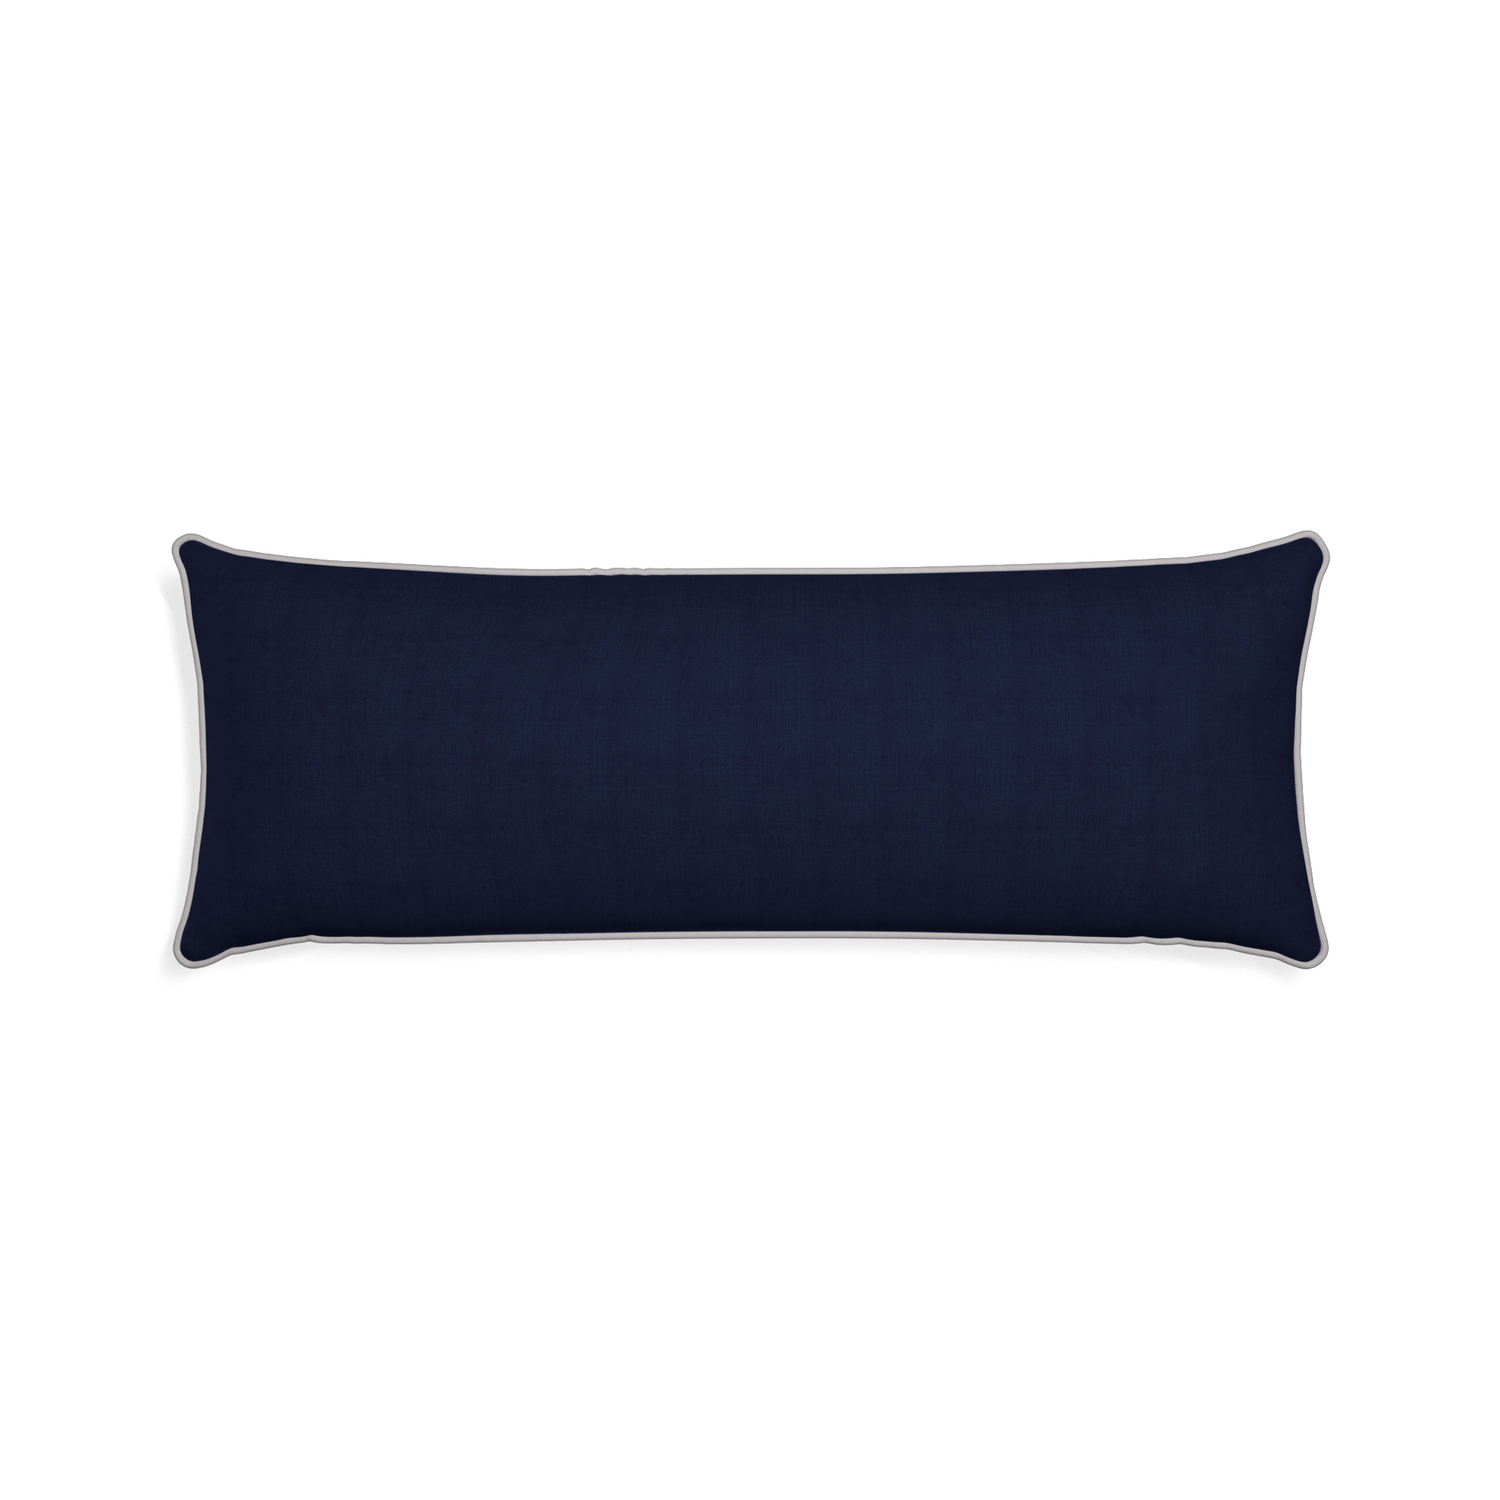 Xl-lumbar midnight custom navy bluepillow with pebble piping on white background